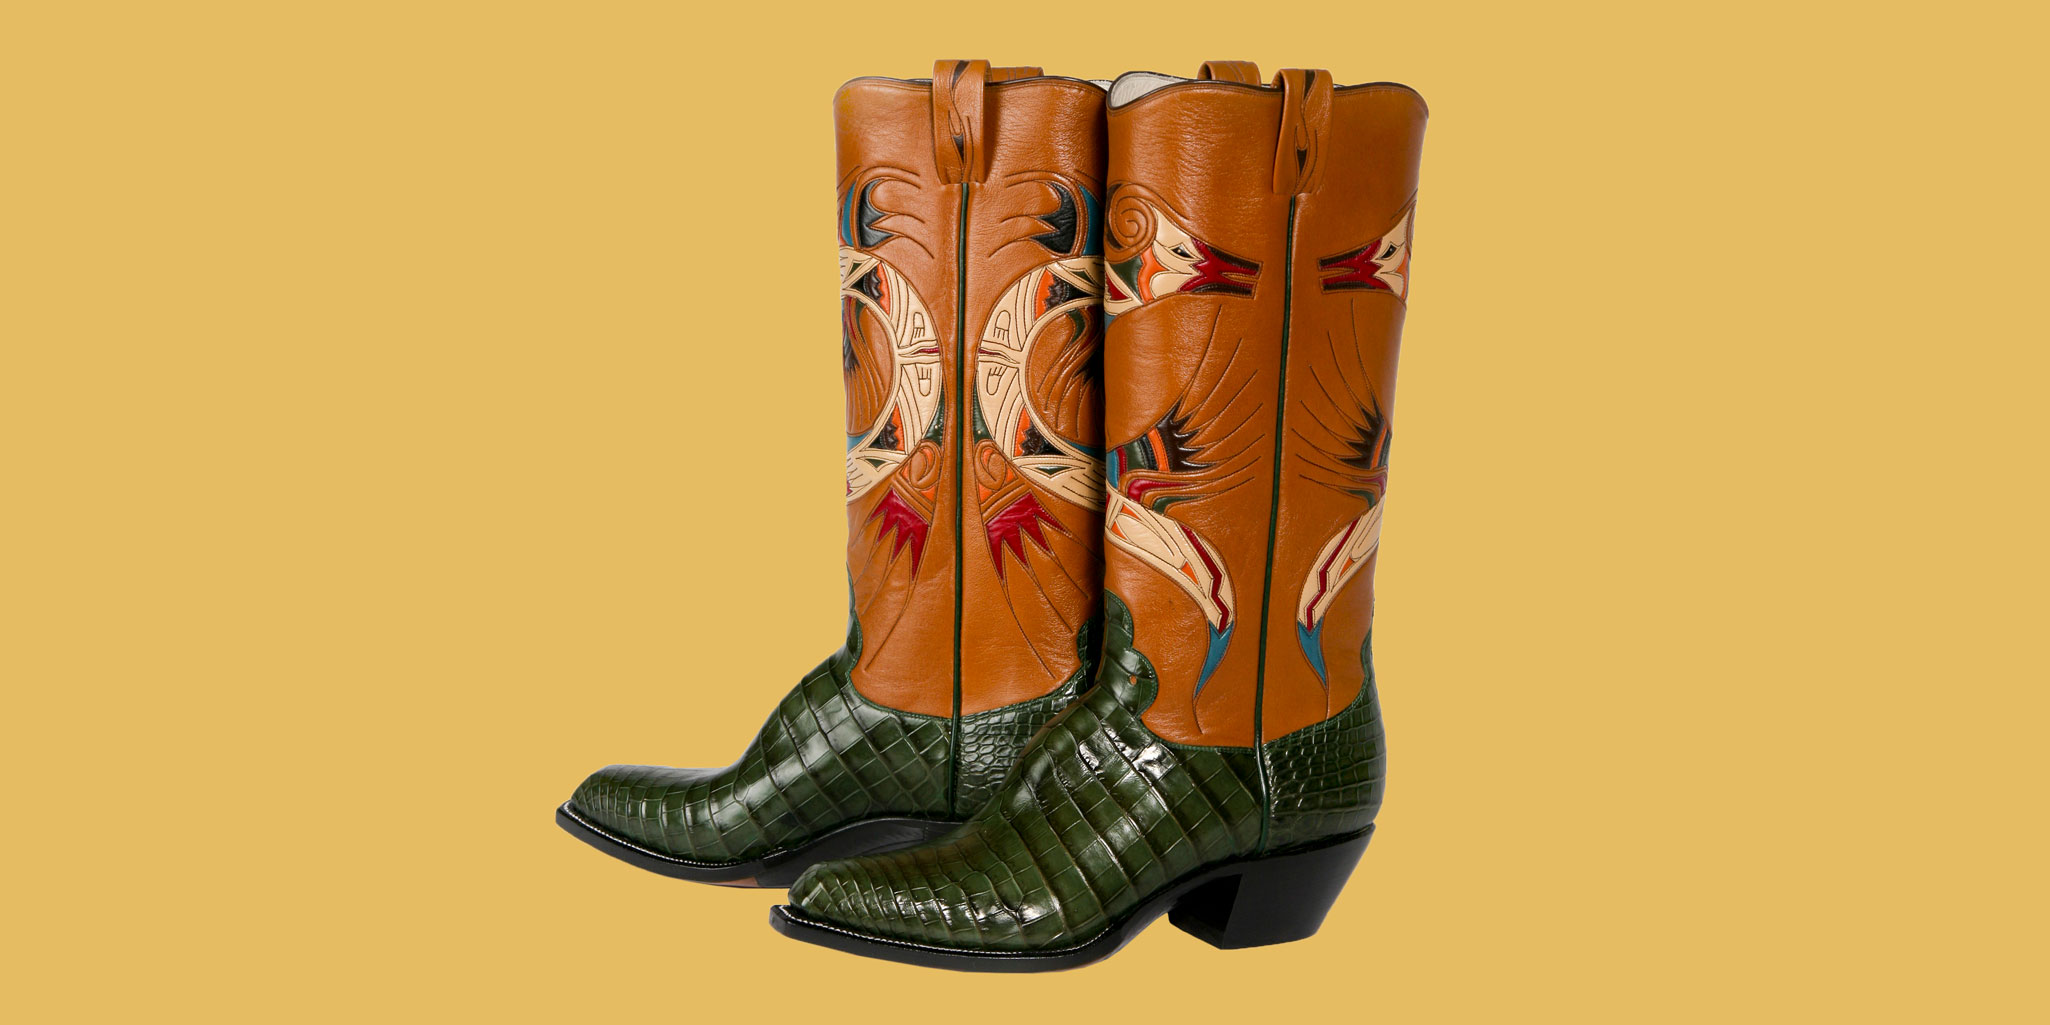 Bespoke Boots That Dazzle | Business 